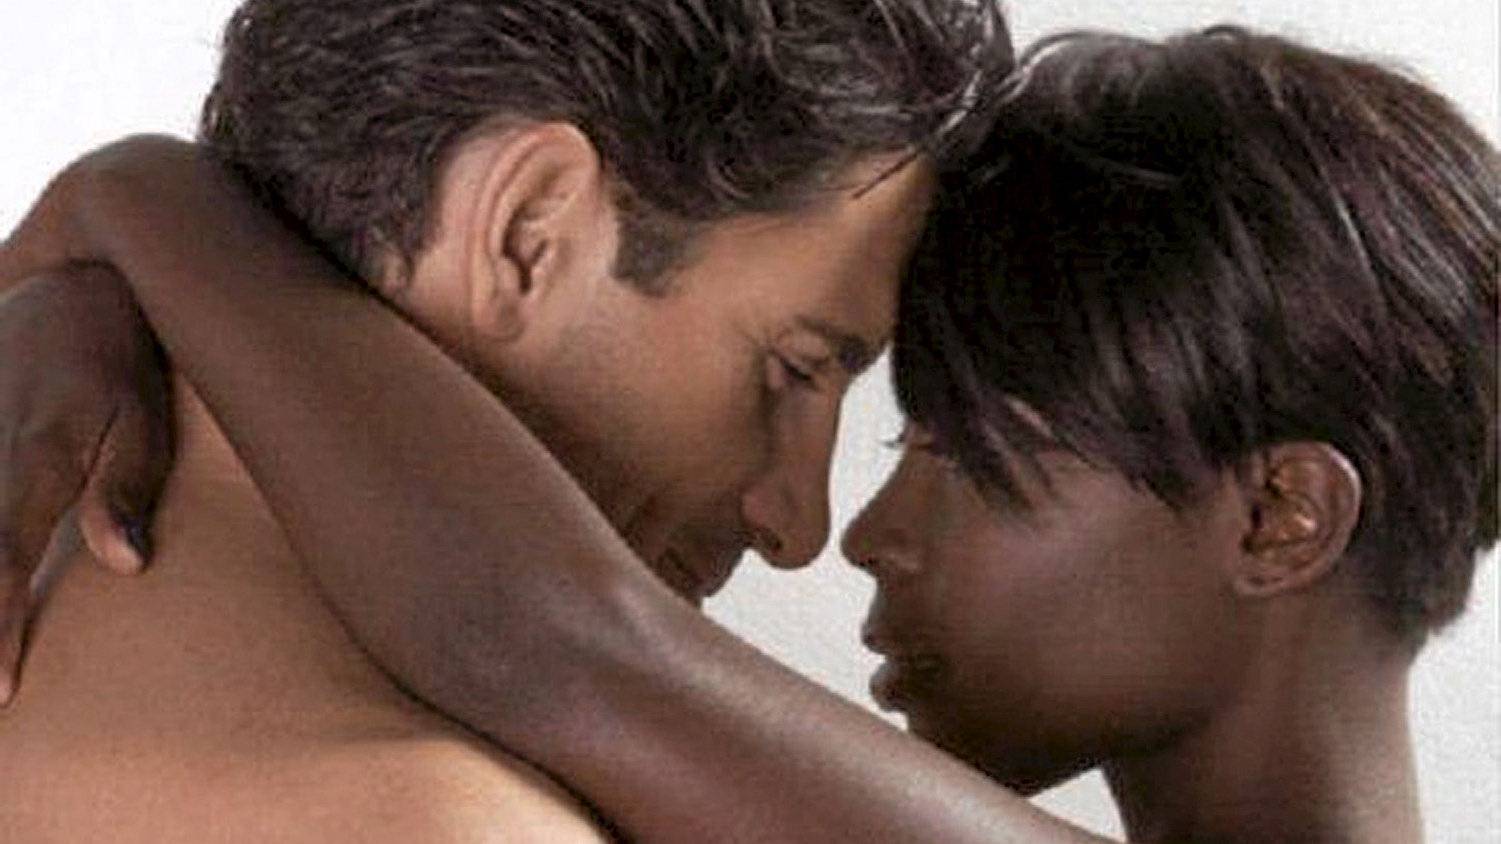 Sexy interracial poster sparks furor in South Africa photo